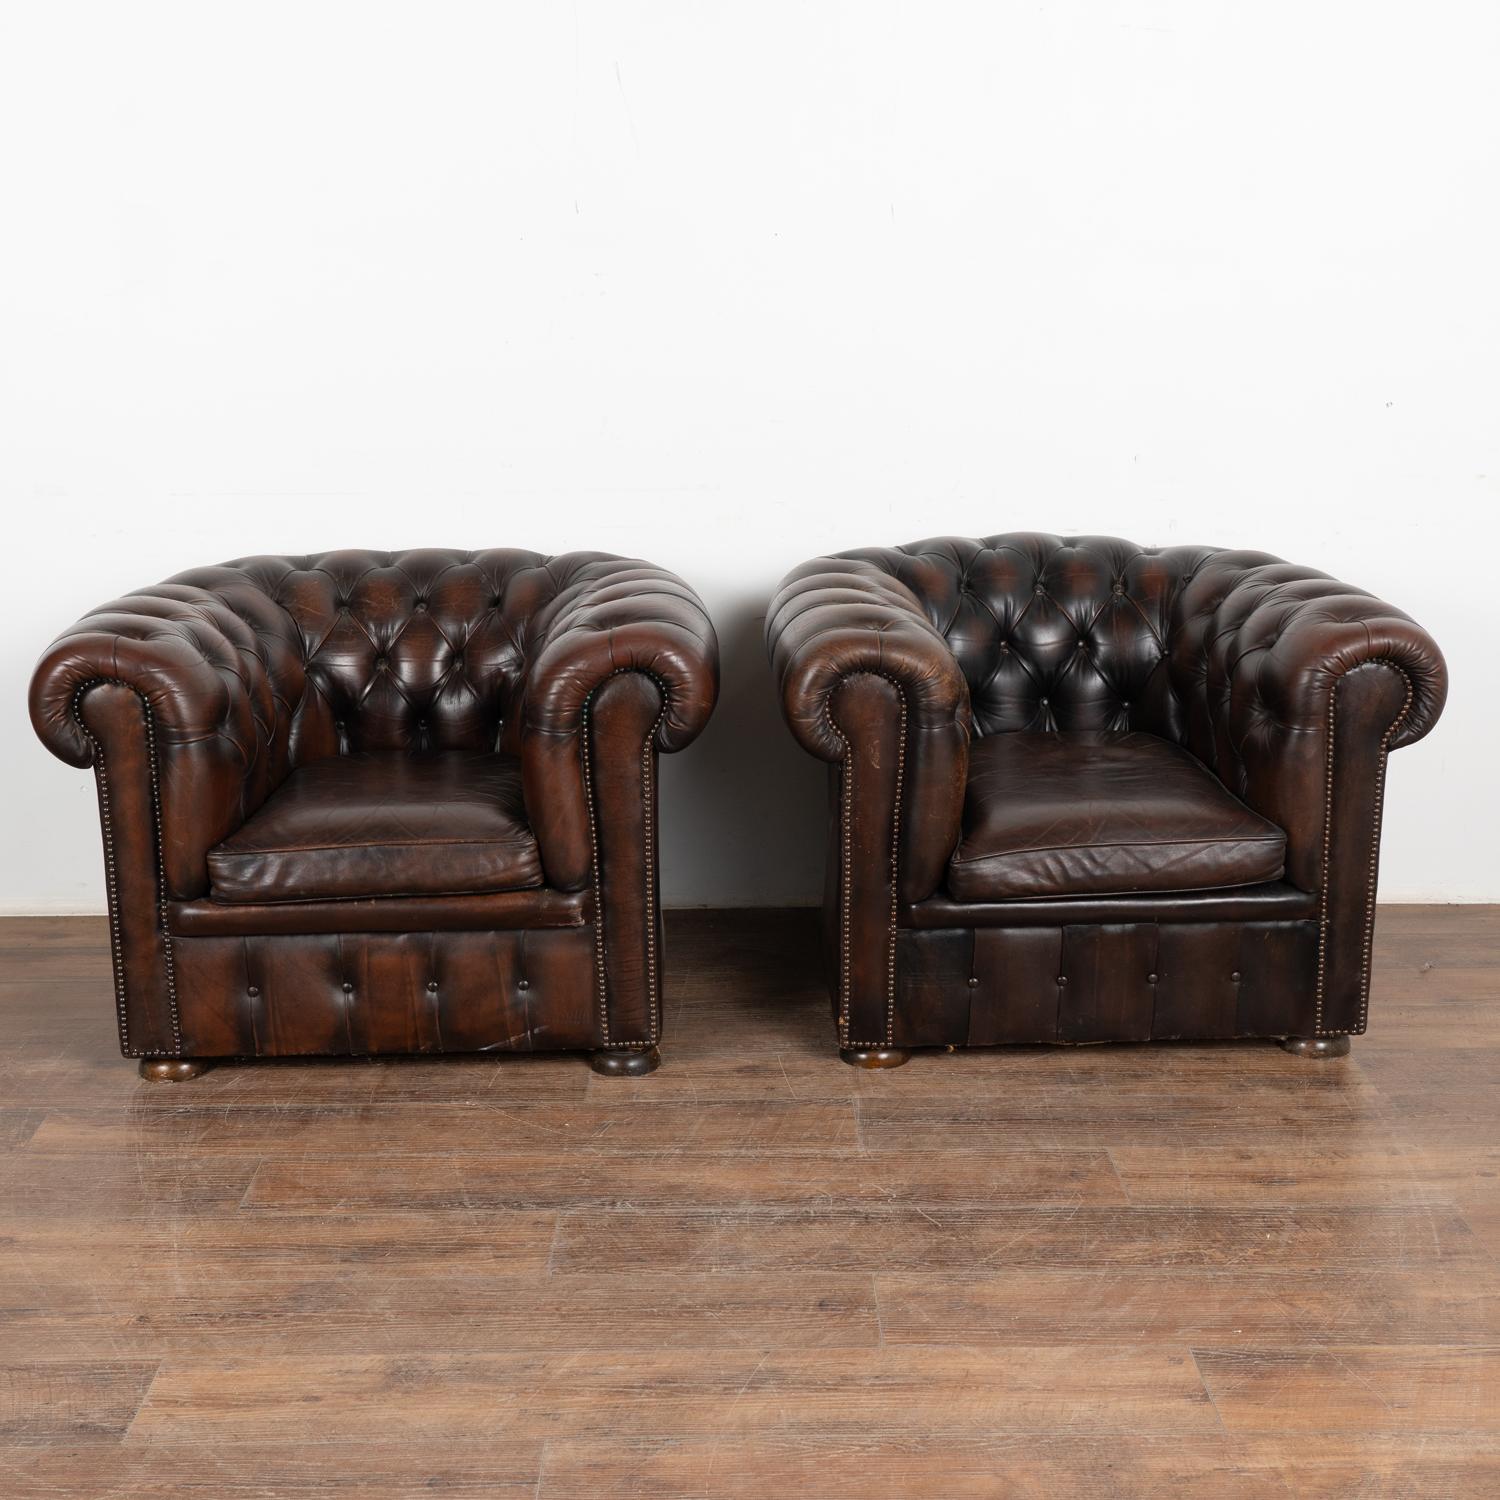 Danish Pair, Chesterfield Brown Leather Armchair Club Chairs, Denmark circa 1940-60 For Sale